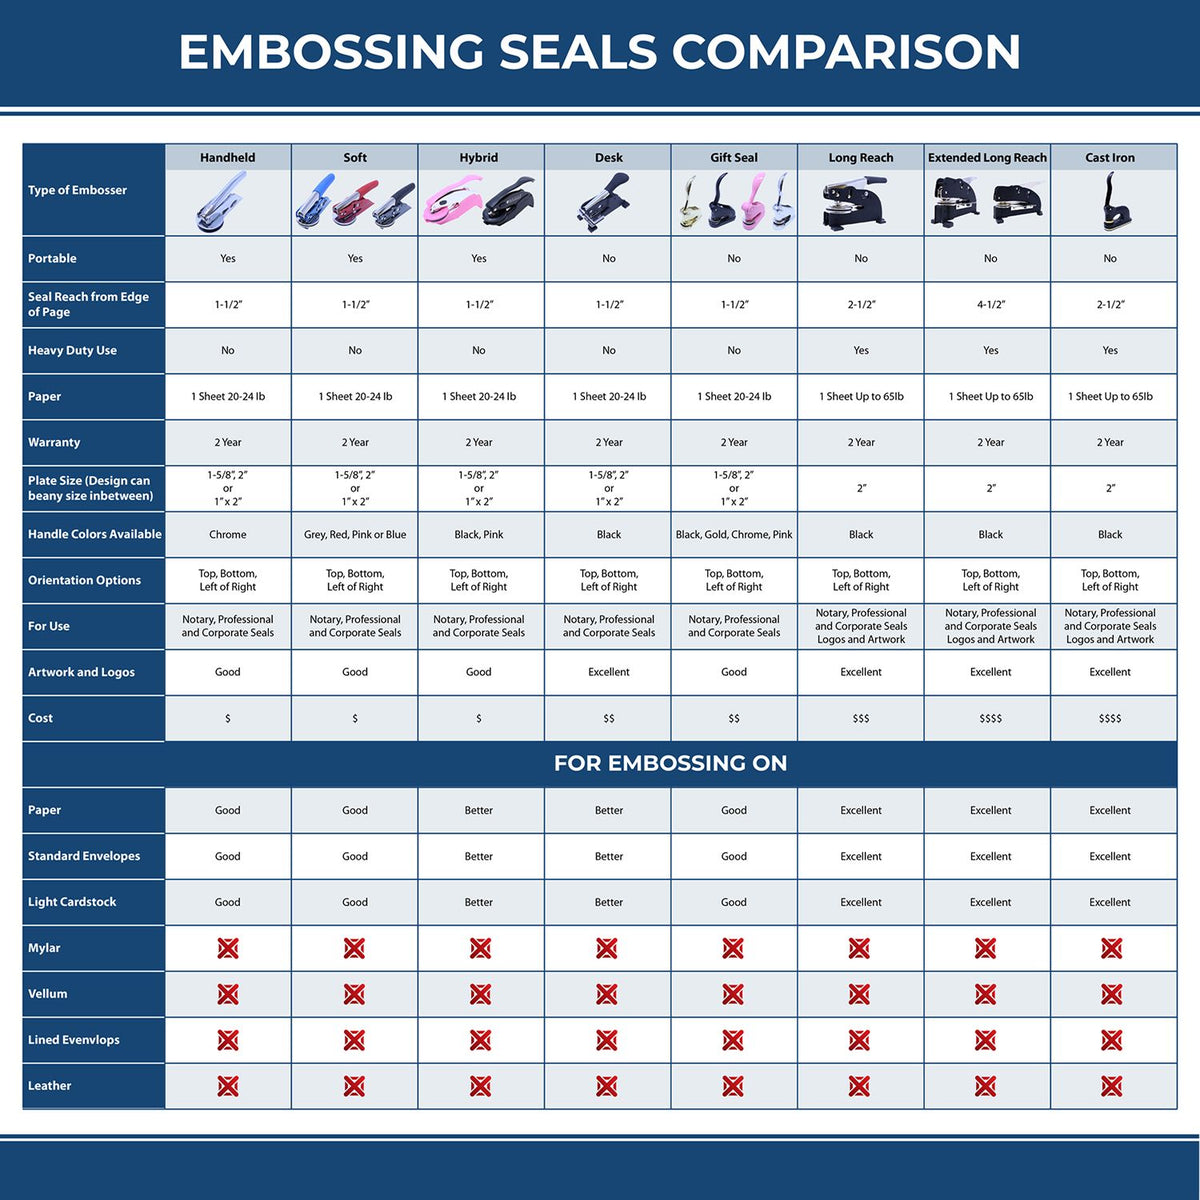 A comparison chart for the different types of mount models available for the Heavy Duty Cast Iron Hawaii Geologist Seal Embosser